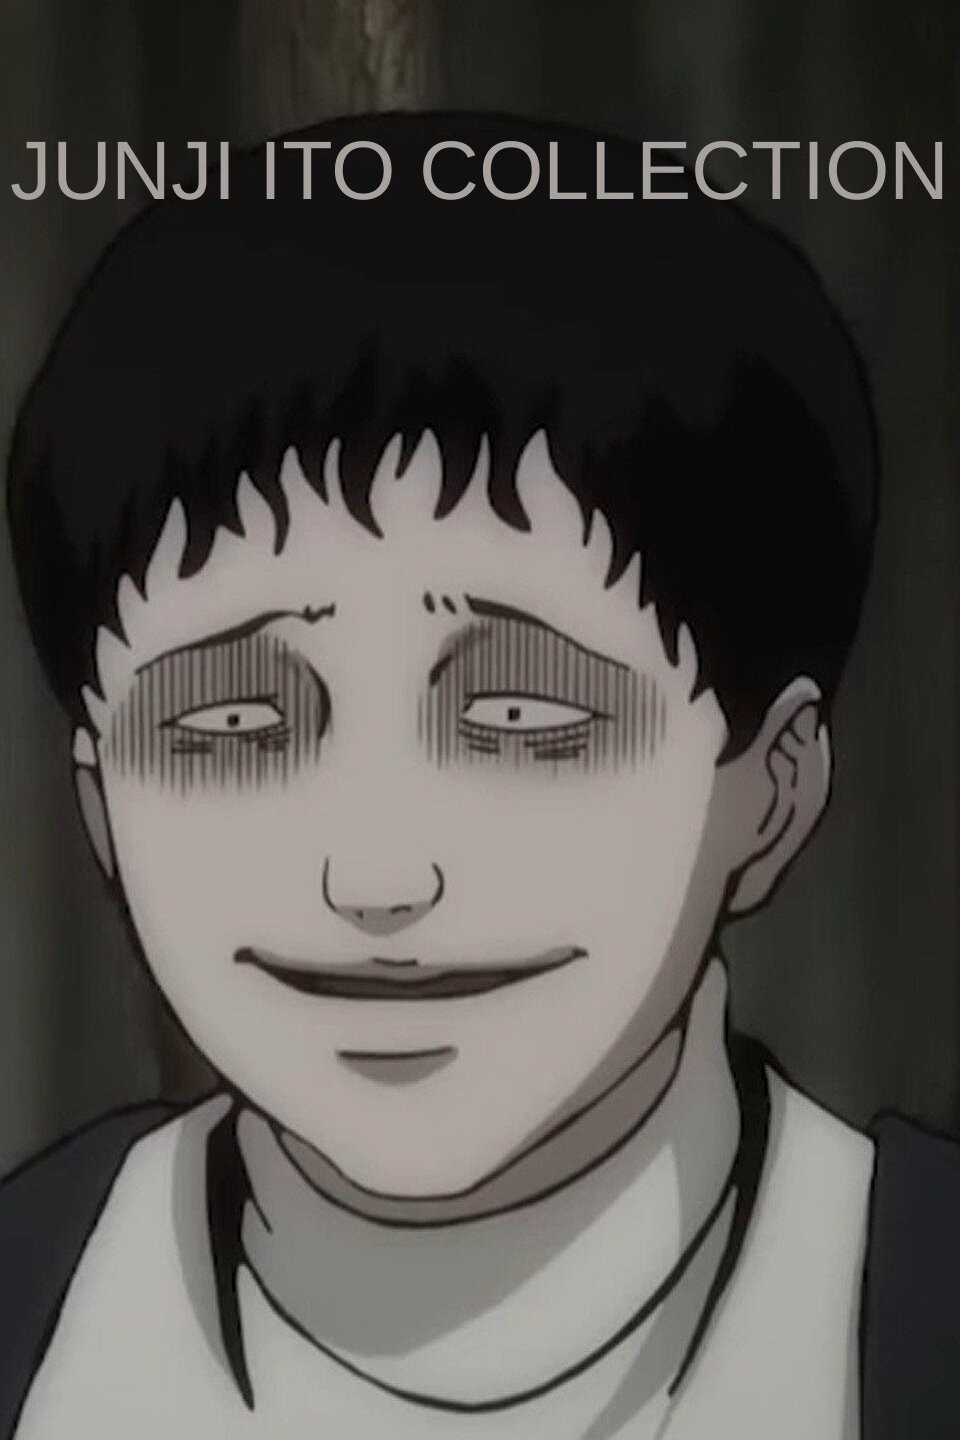 Junji Ito Collection Episode 1 Review 